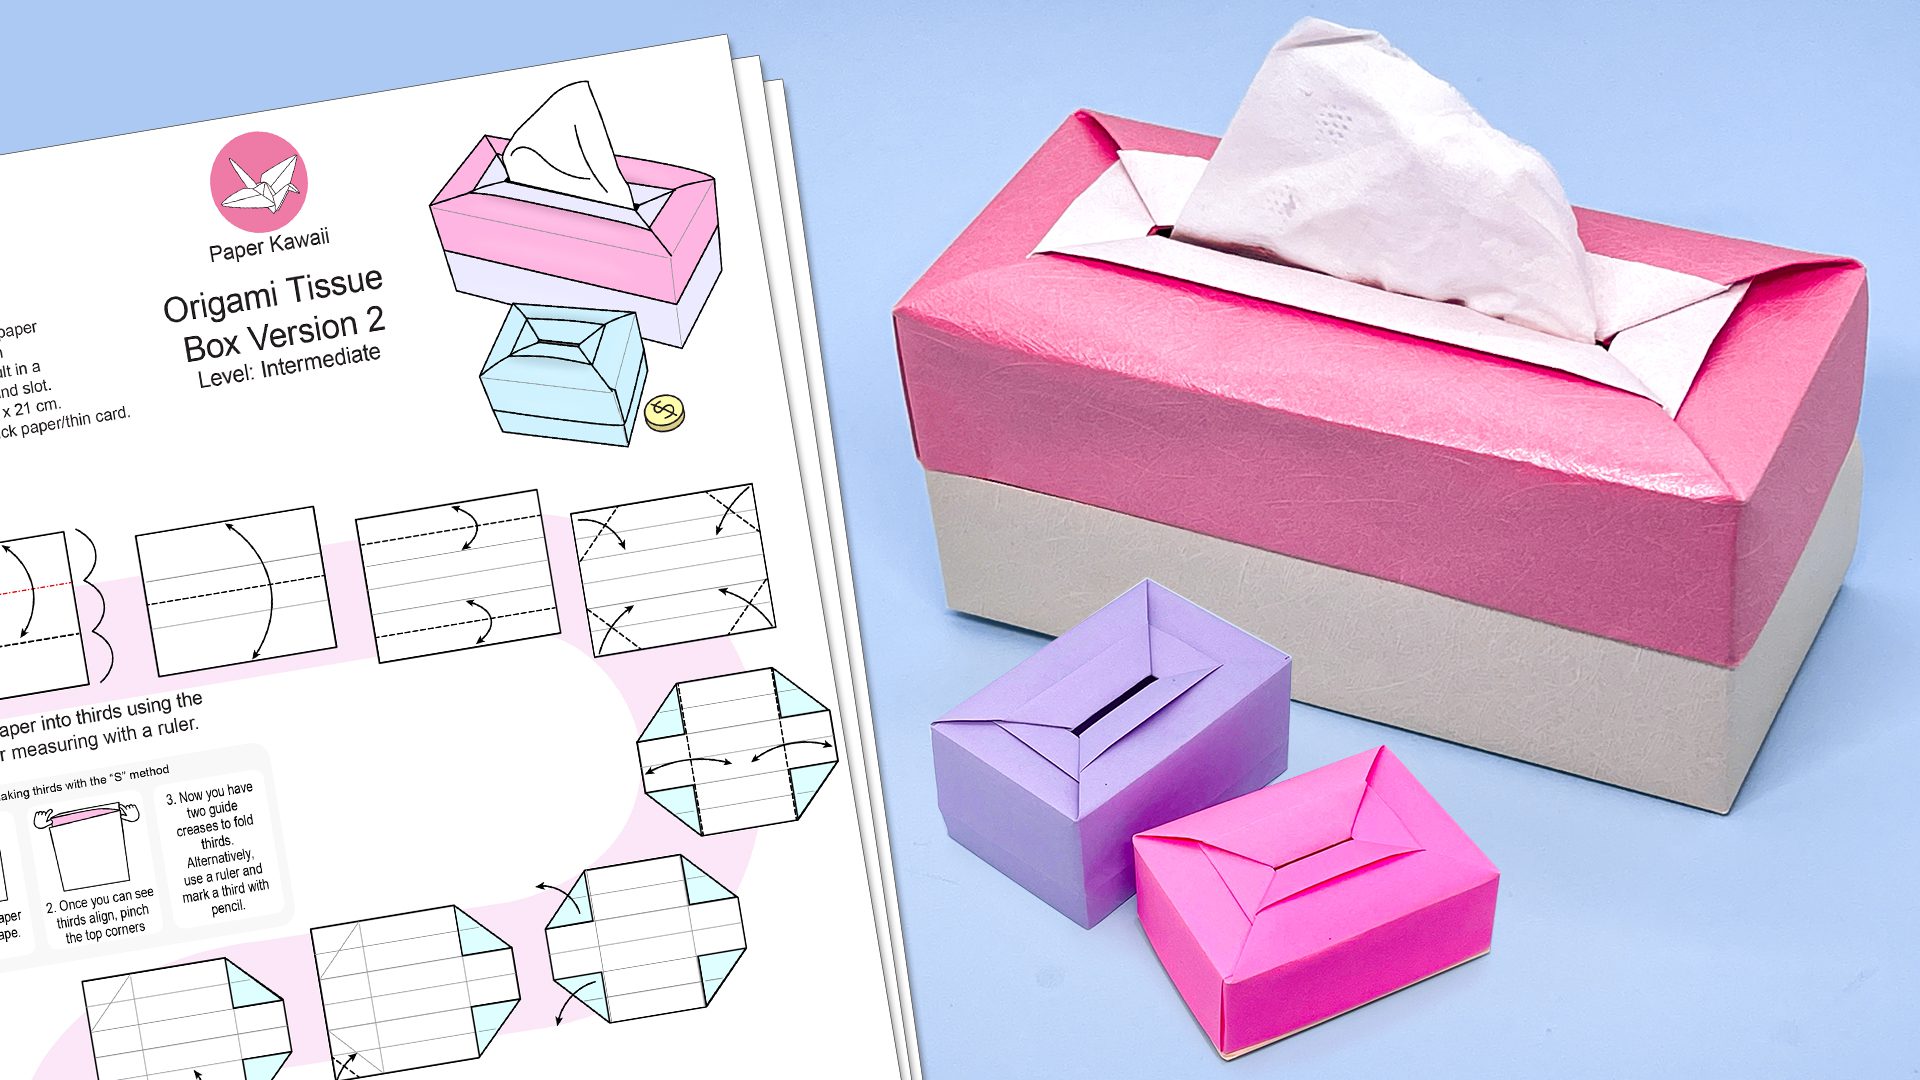 How to make an Origami Tissue Paper Box